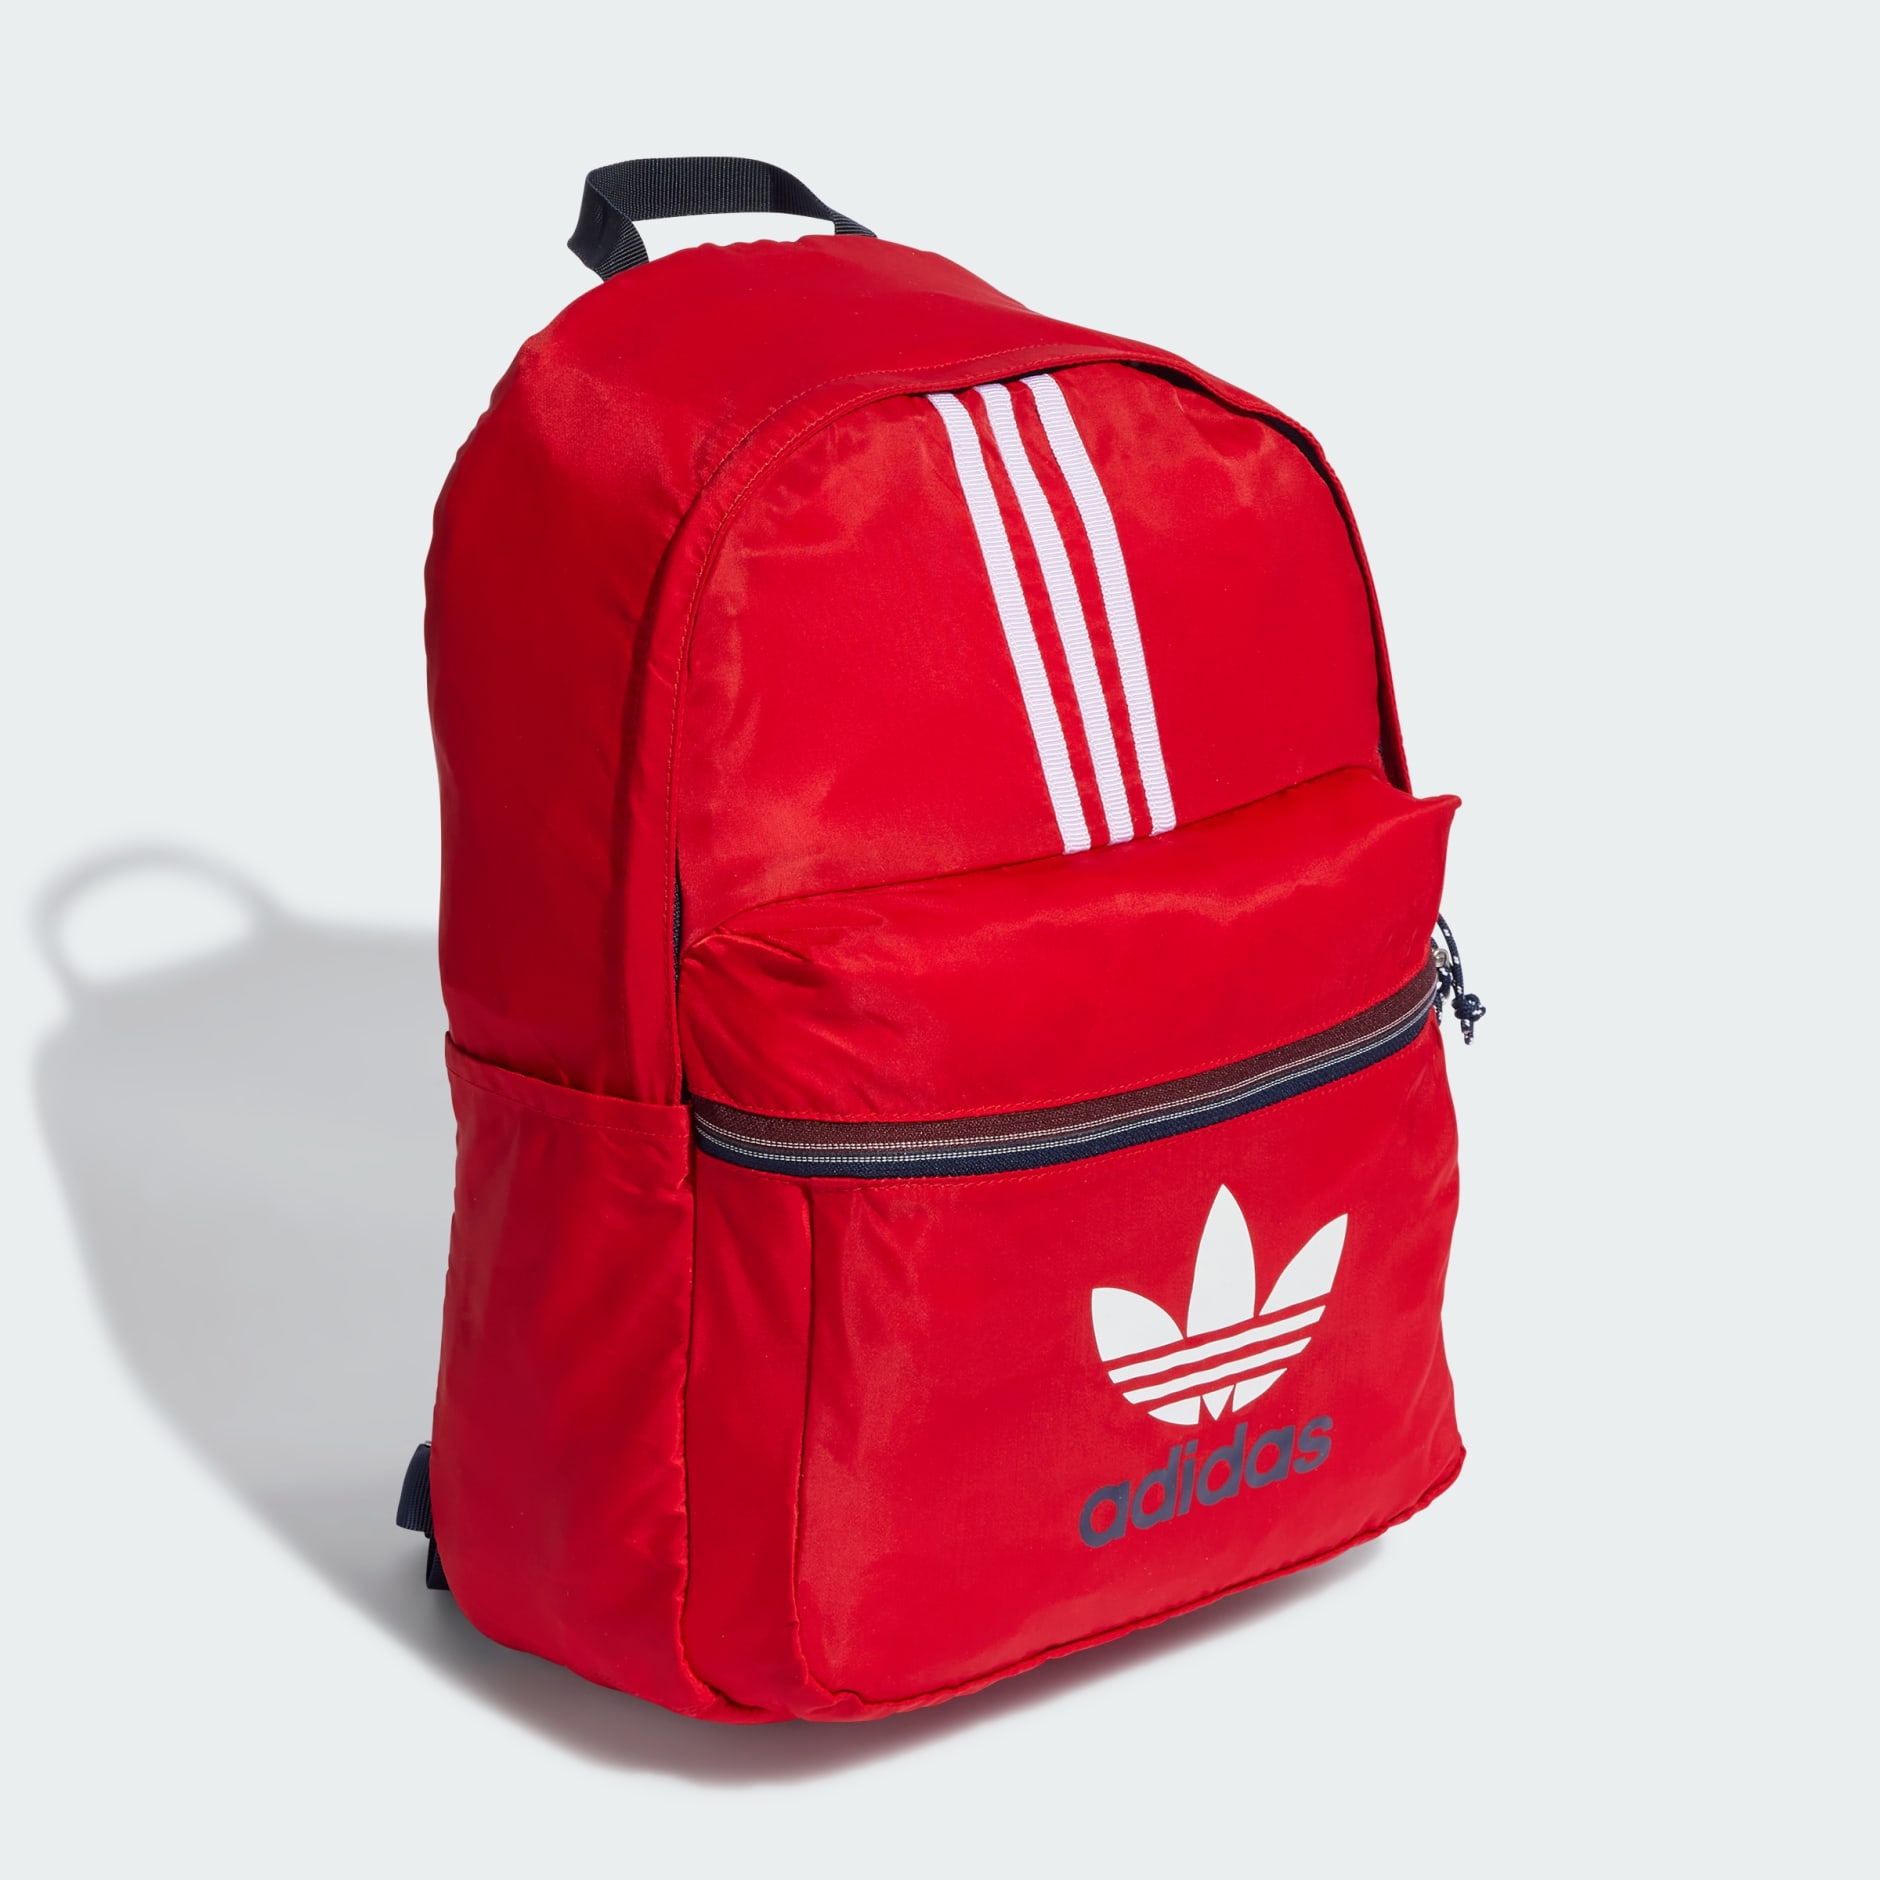 Adicolor Oman - - Archive | Accessories adidas Backpack Red